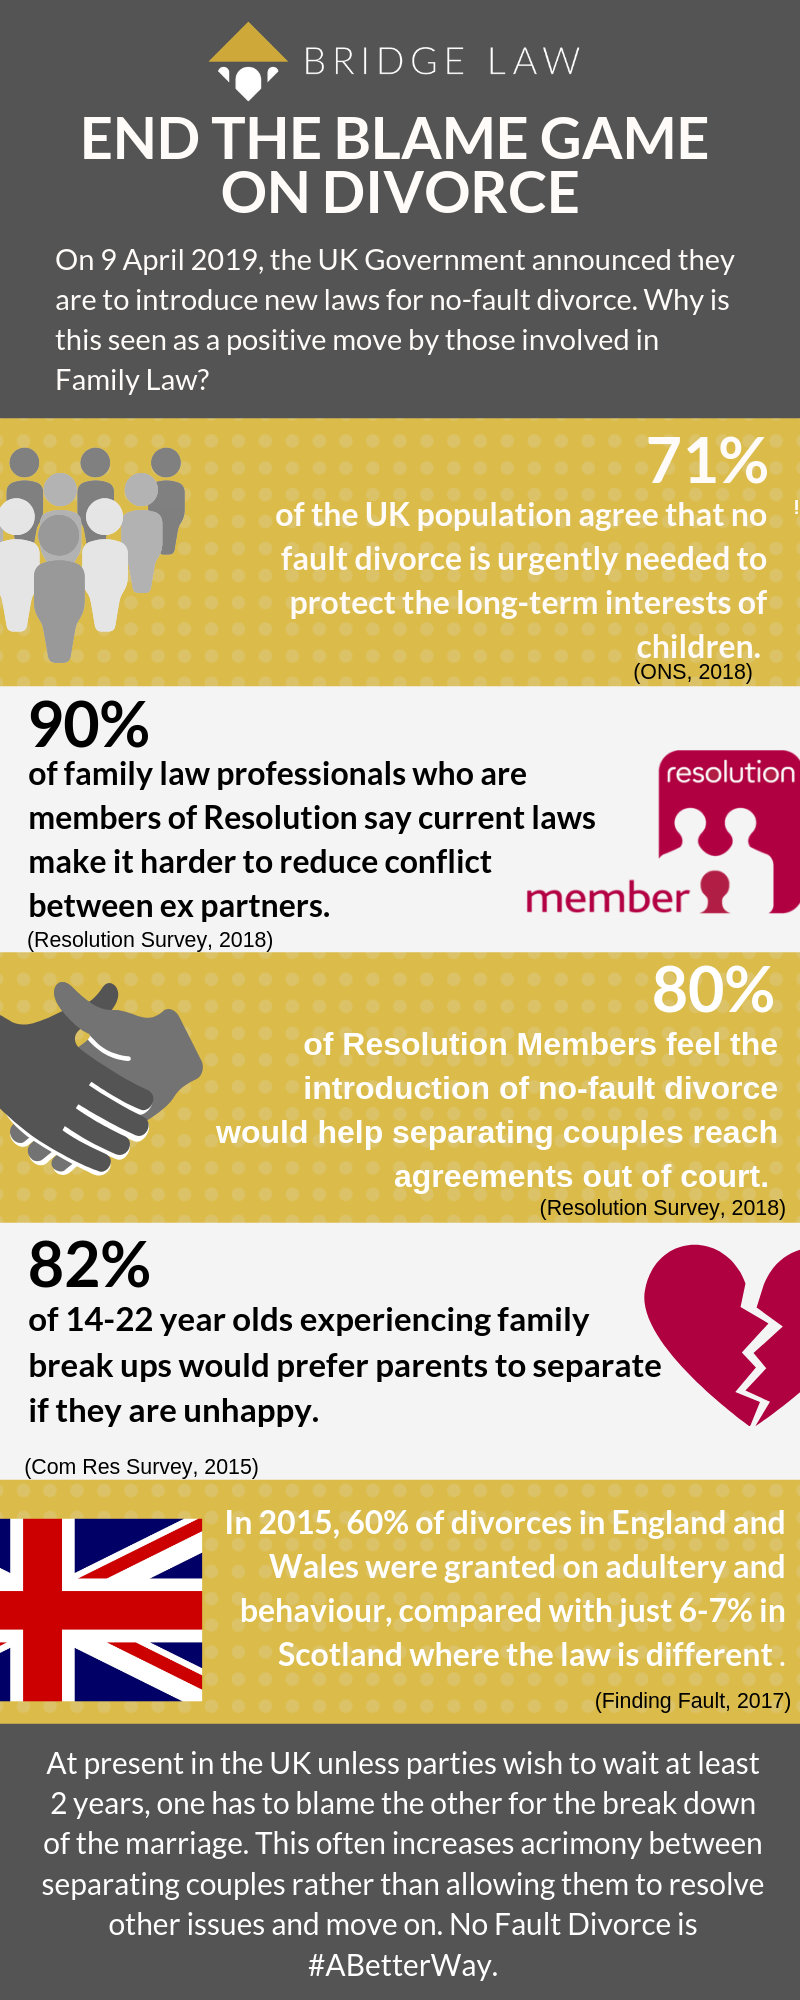 Infographic explaining statistics that support the need for No Fault Divorce in the UK after the government announces in April 2019 that they will be introducing new divorce laws in future